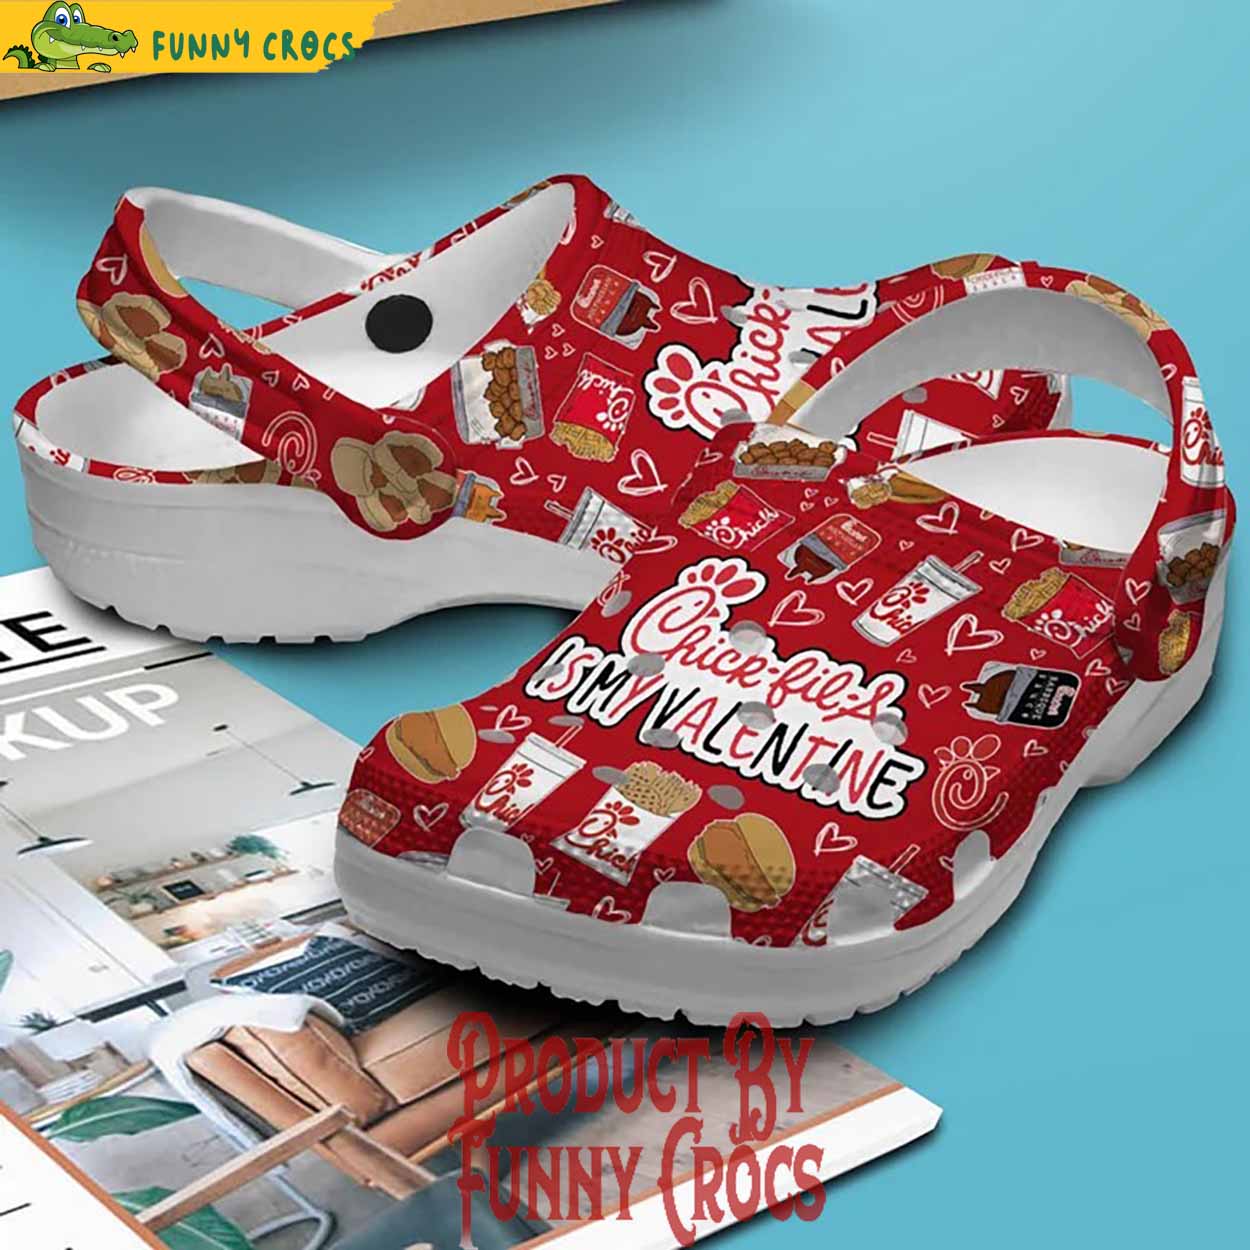 Chick Fil A Is My Valentines Crocs Shoes - Discover Comfort And Style ...